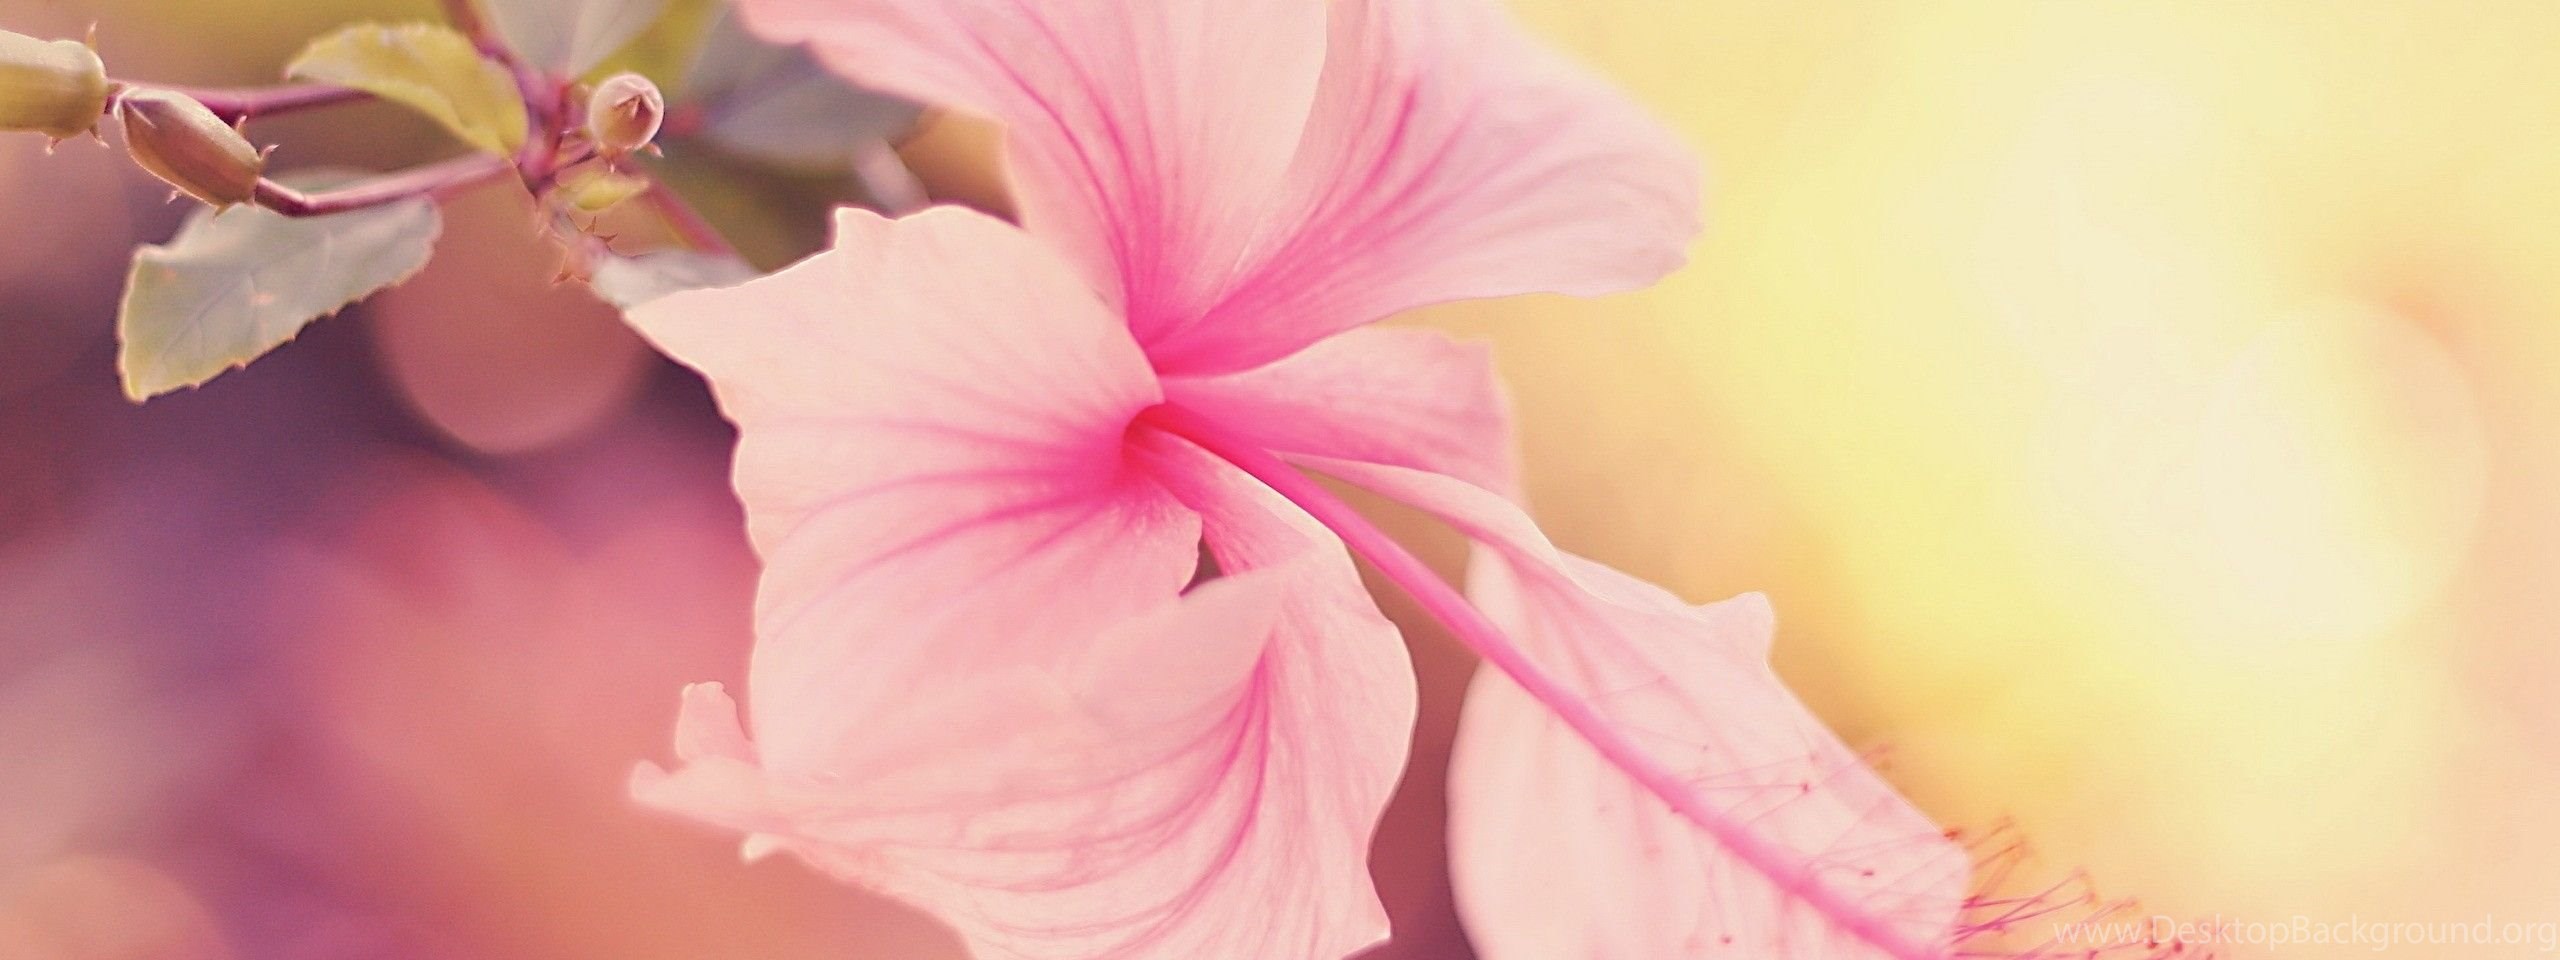 Download Hibiscus Wallpapers Hd 4406 1920x1200 Px High Resolution Images, Photos, Reviews